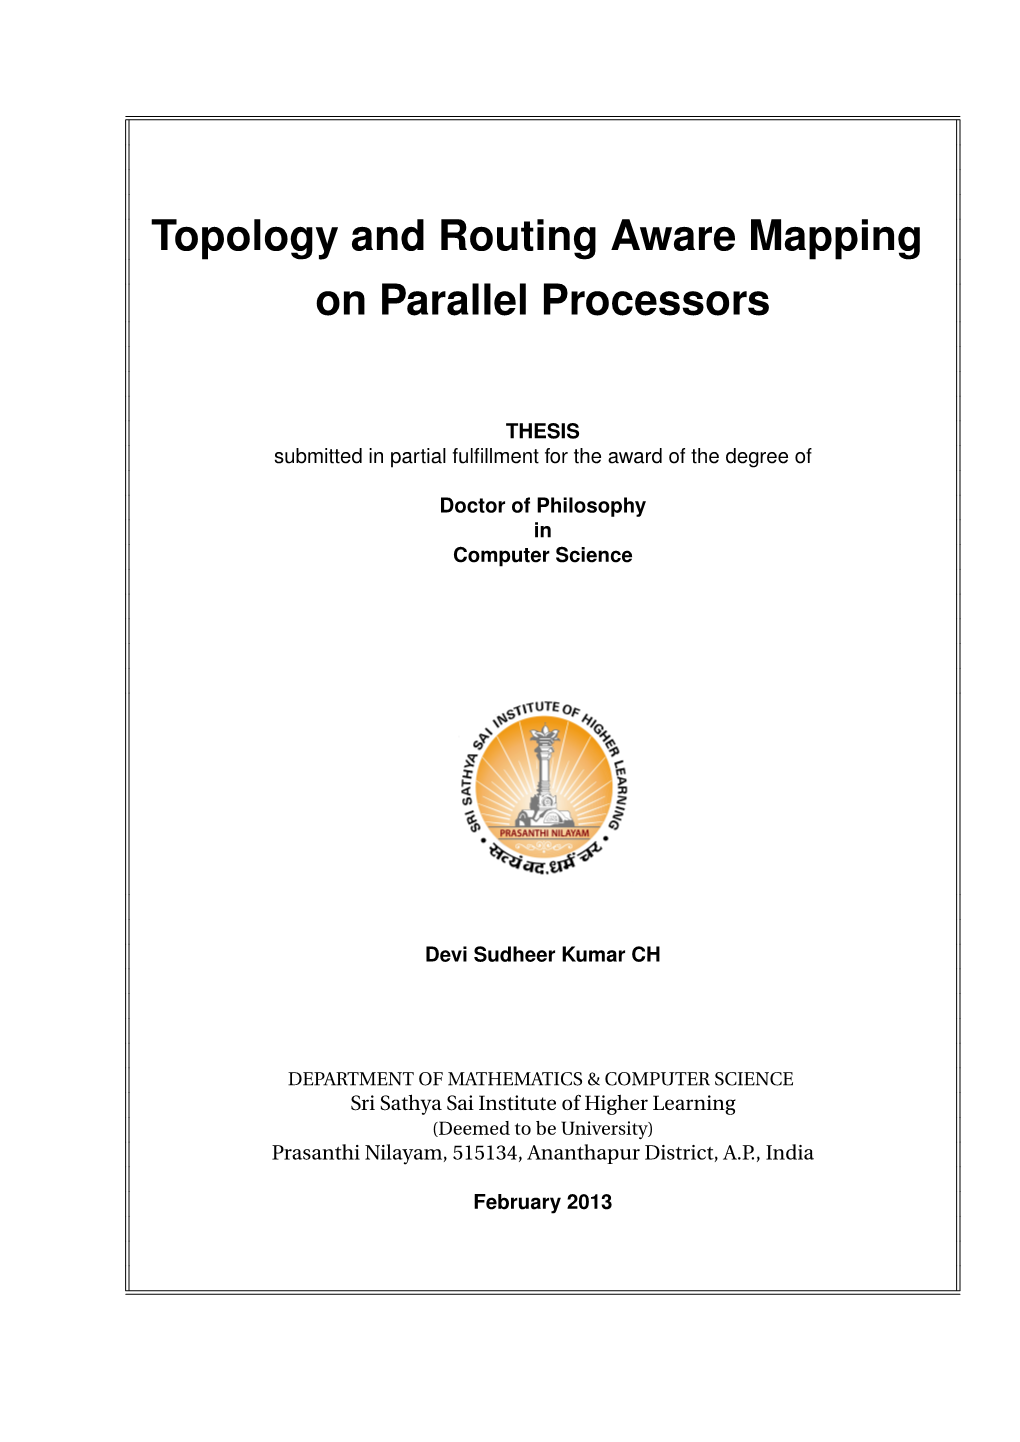 Topology and Routing Aware Mapping on Parallel Processors